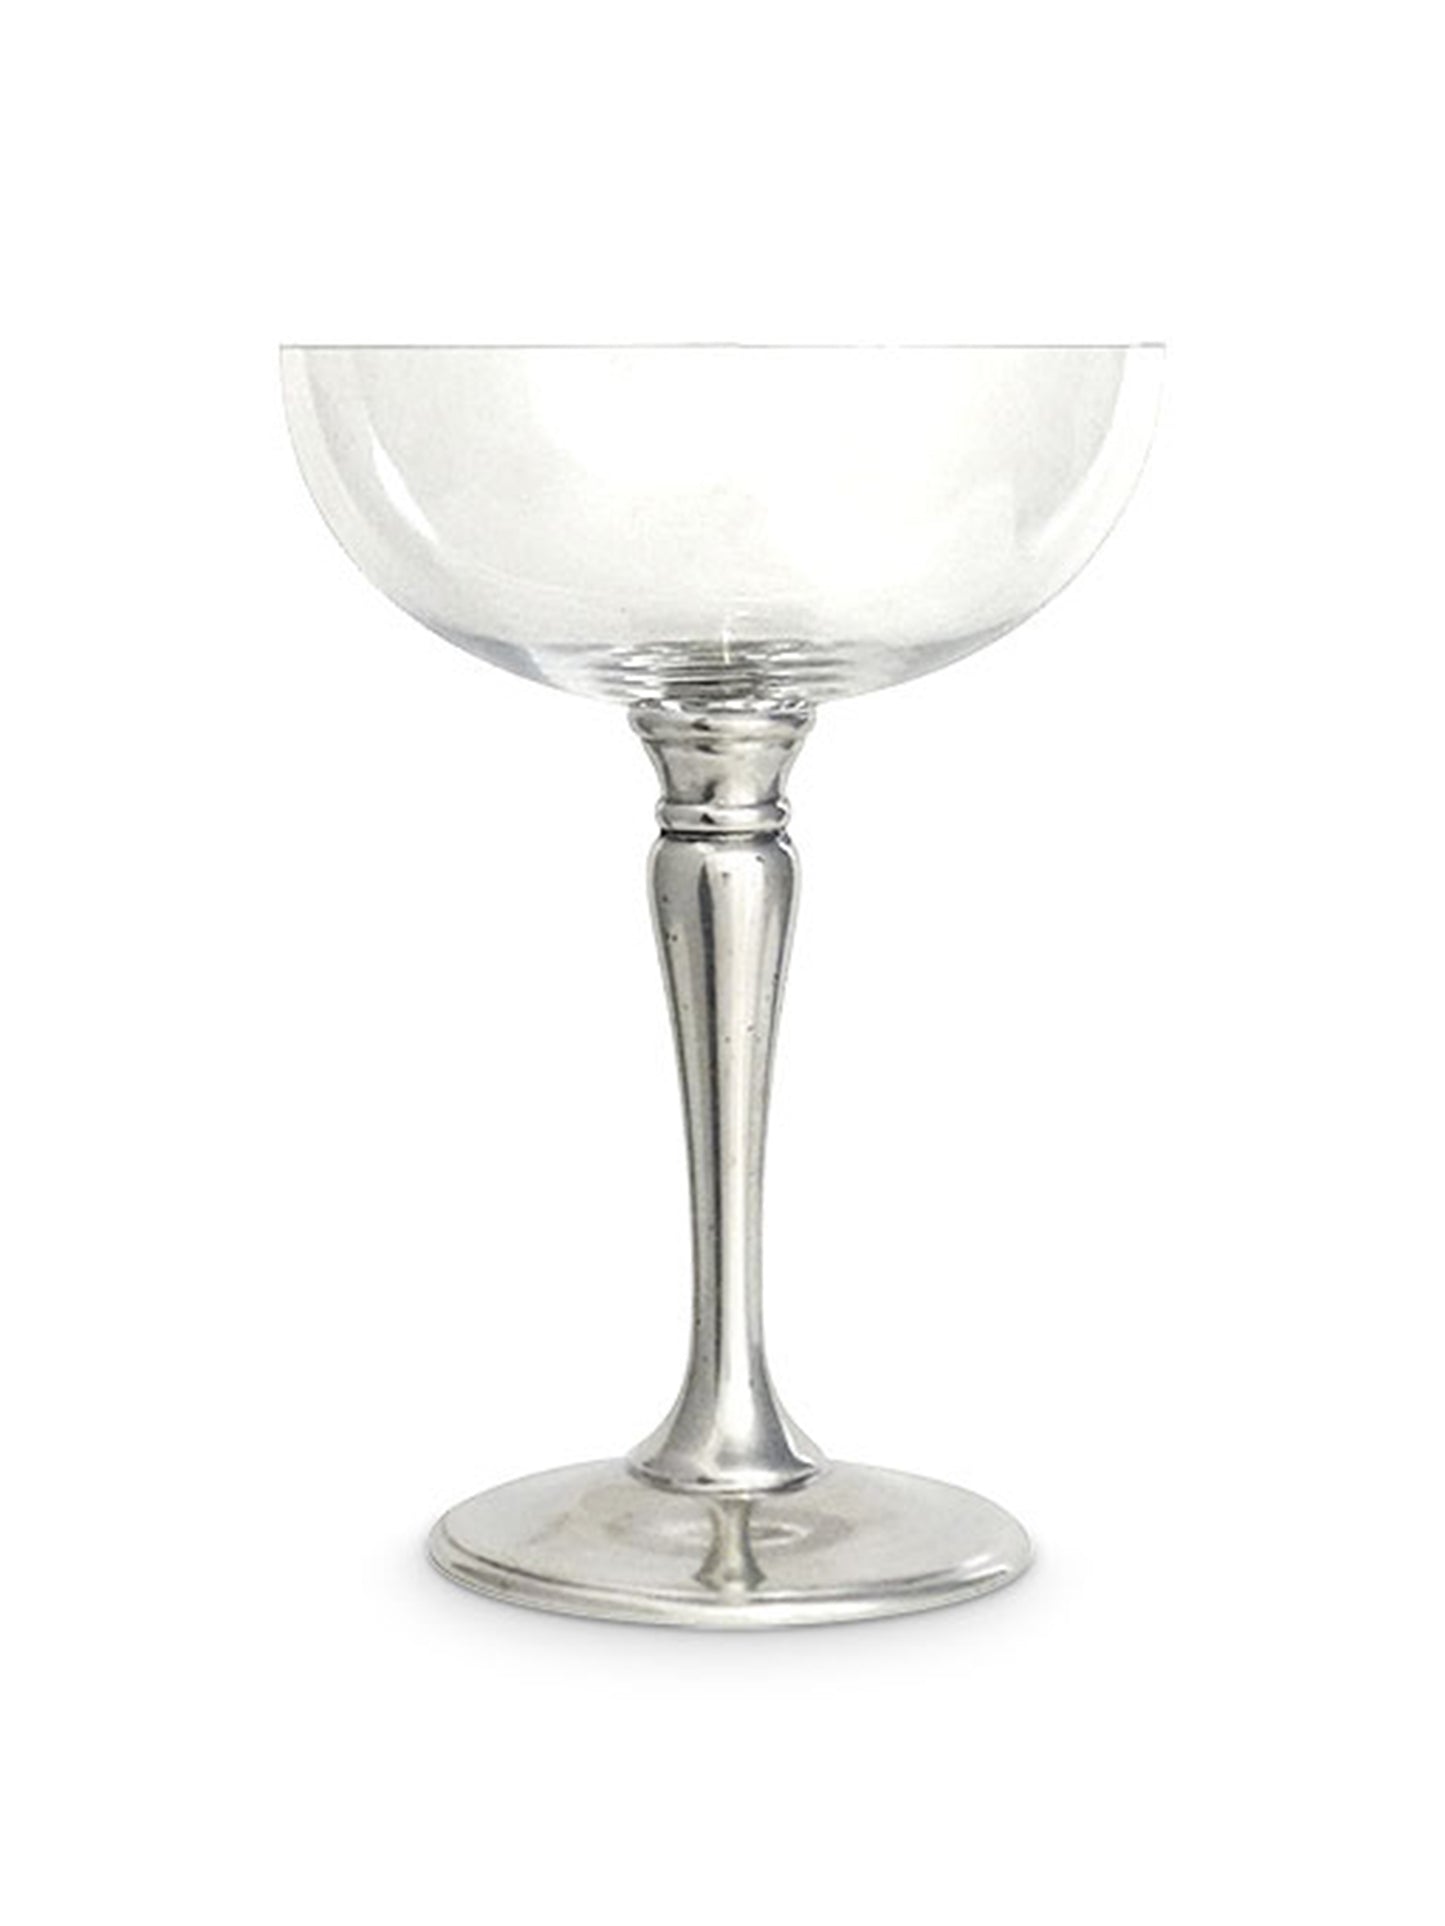 15 Cocktails Served in a Coupe Glass – The Mixer